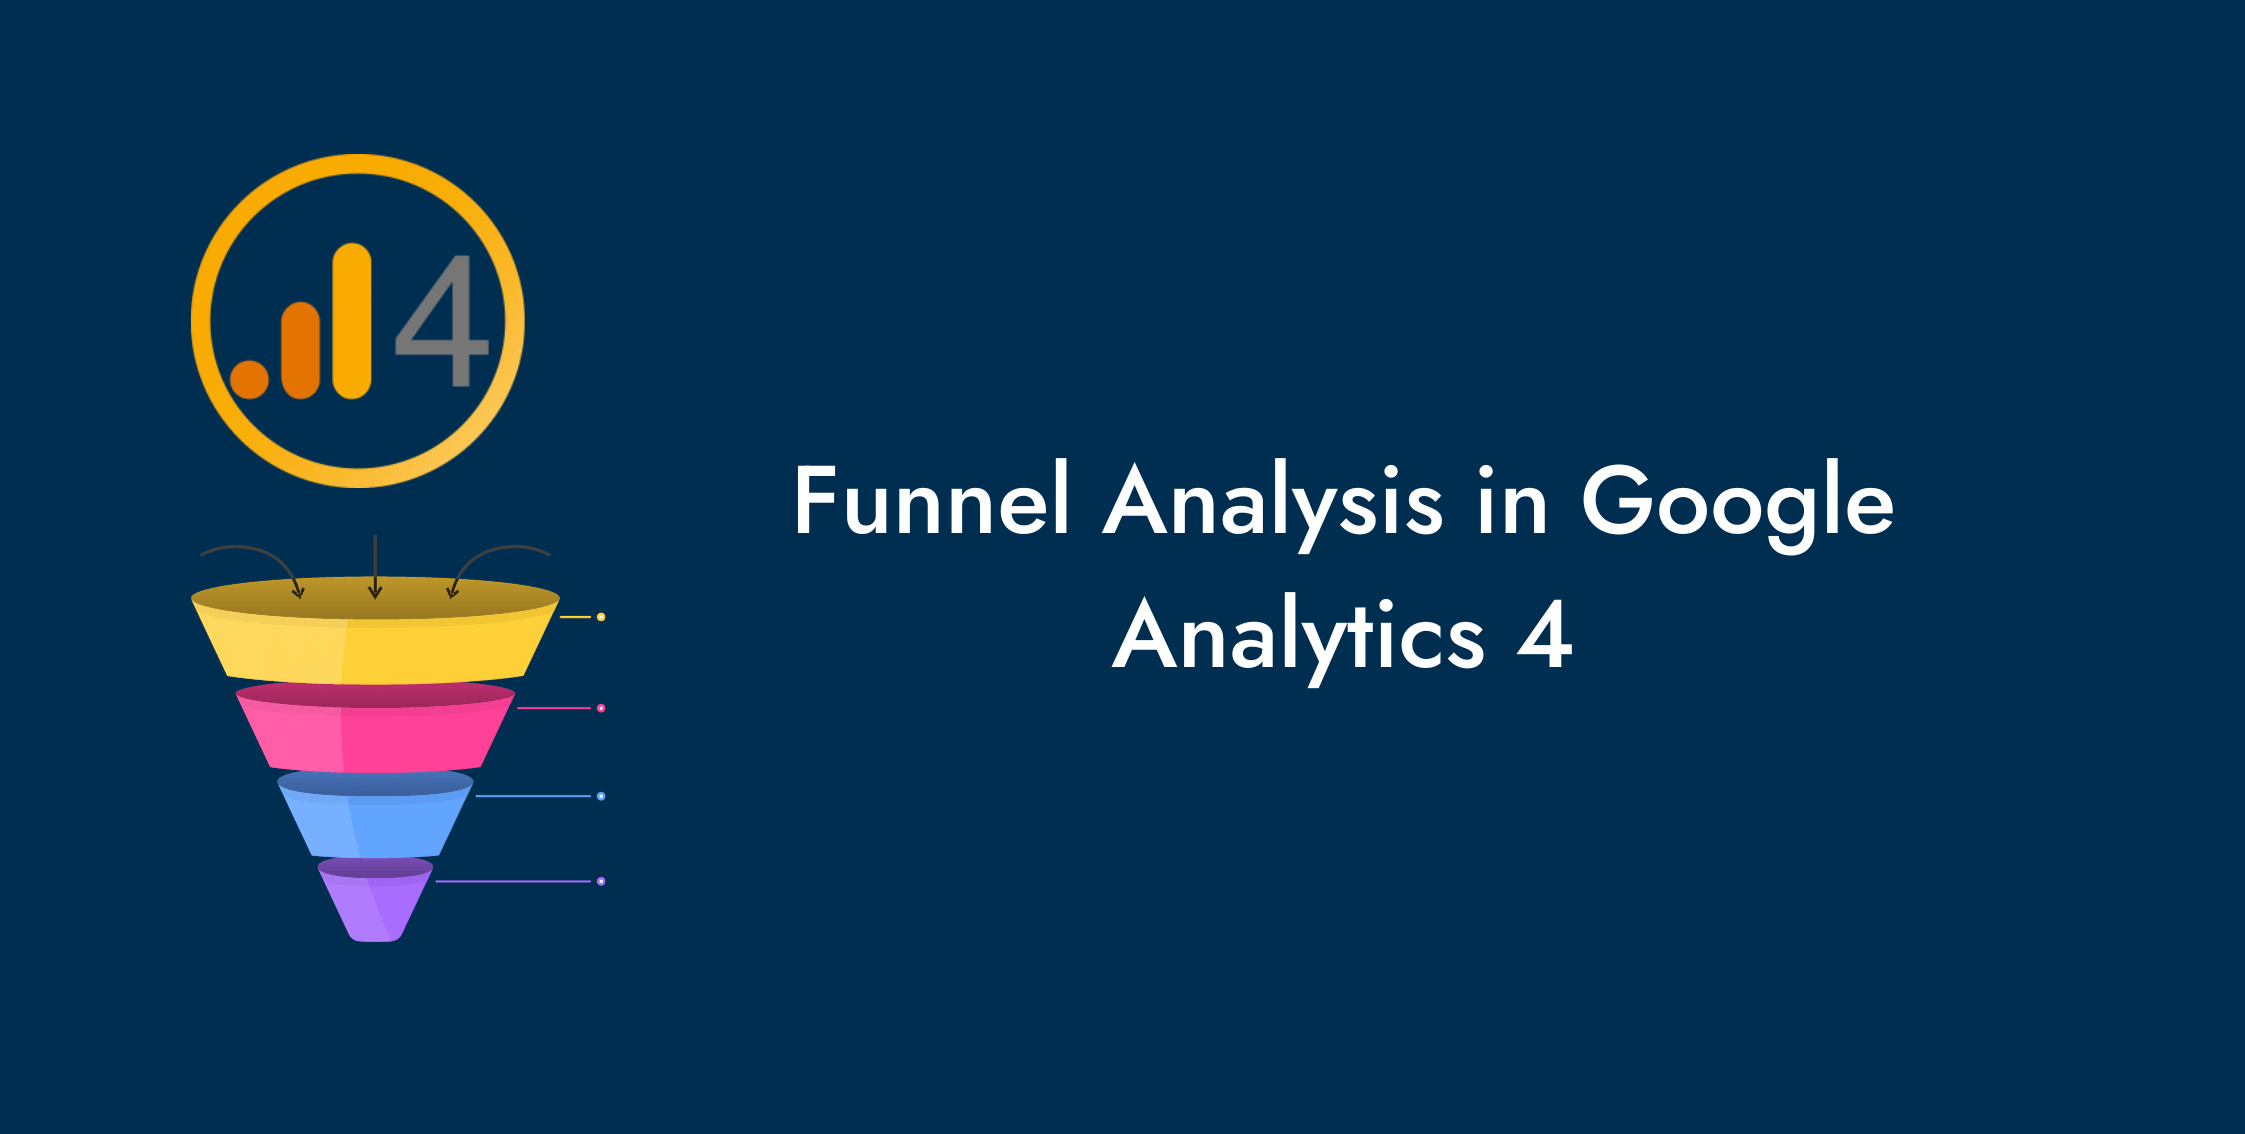 How To Do Funnel Analysis In Funnel Exploration Report in GA4?